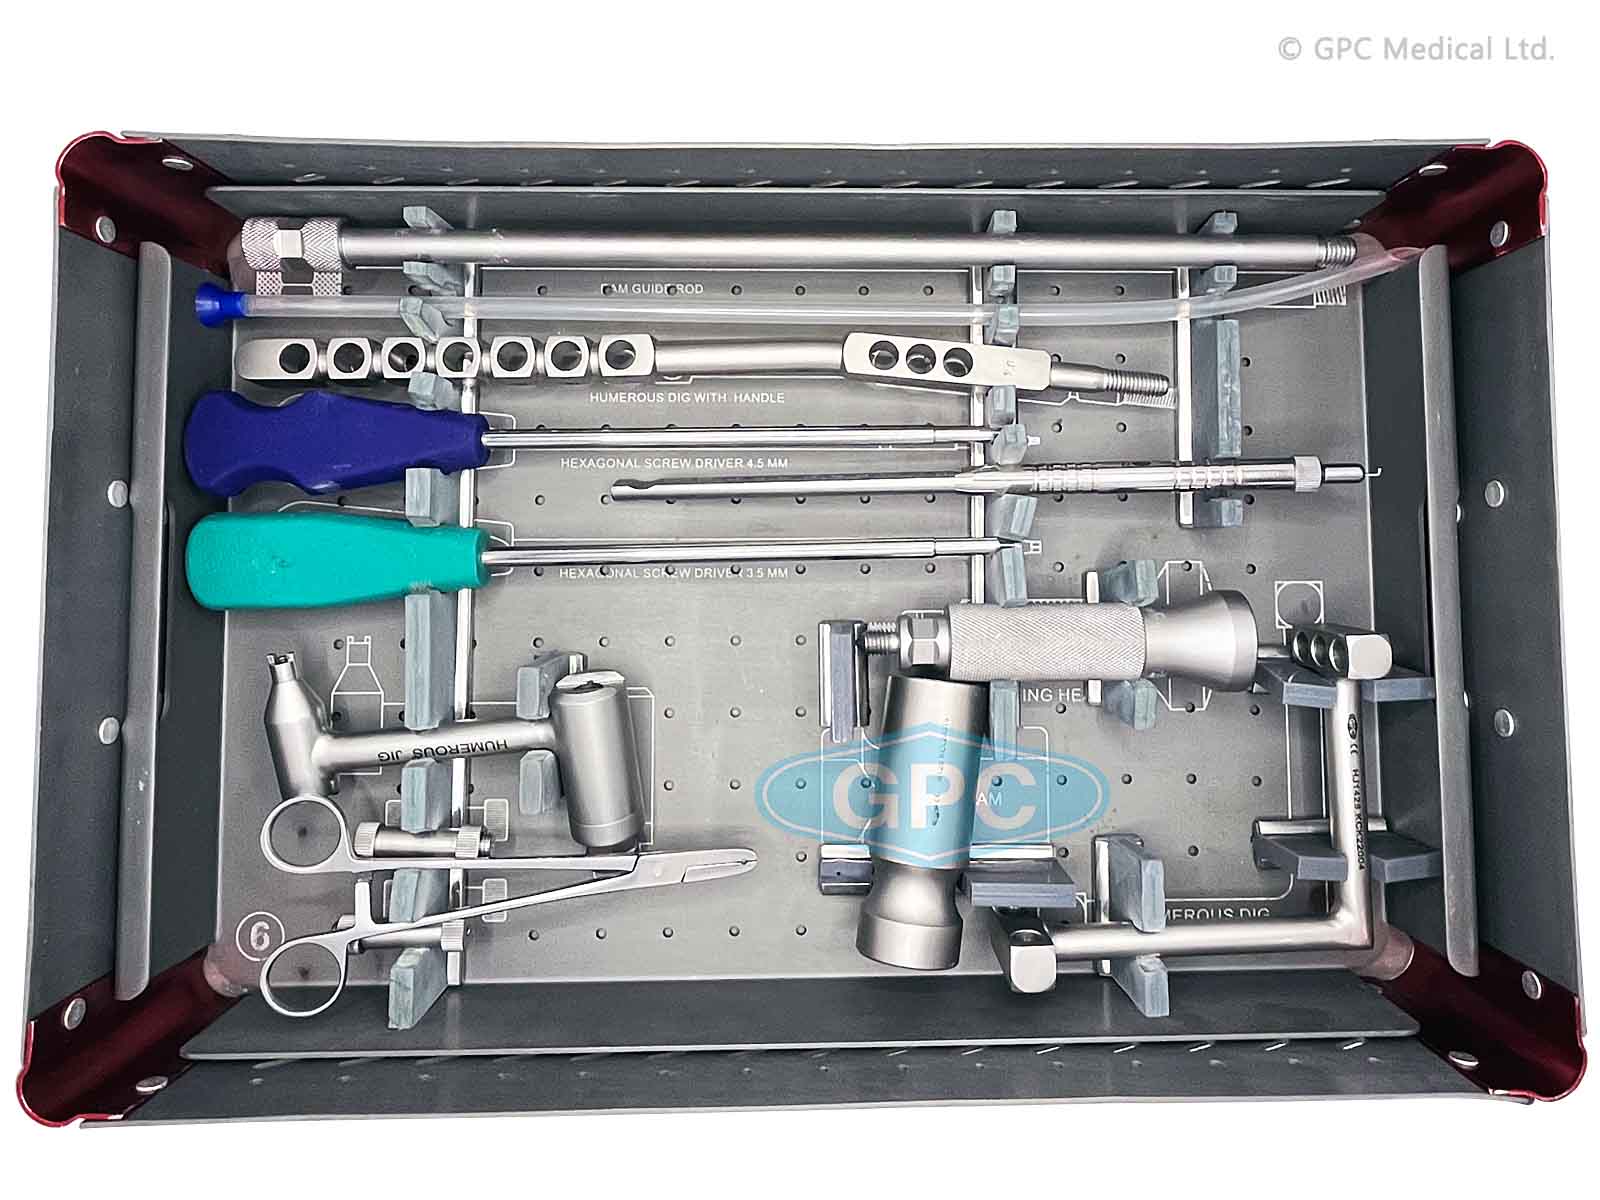 Synthes Universal Nail Insertion Instrumentation Set